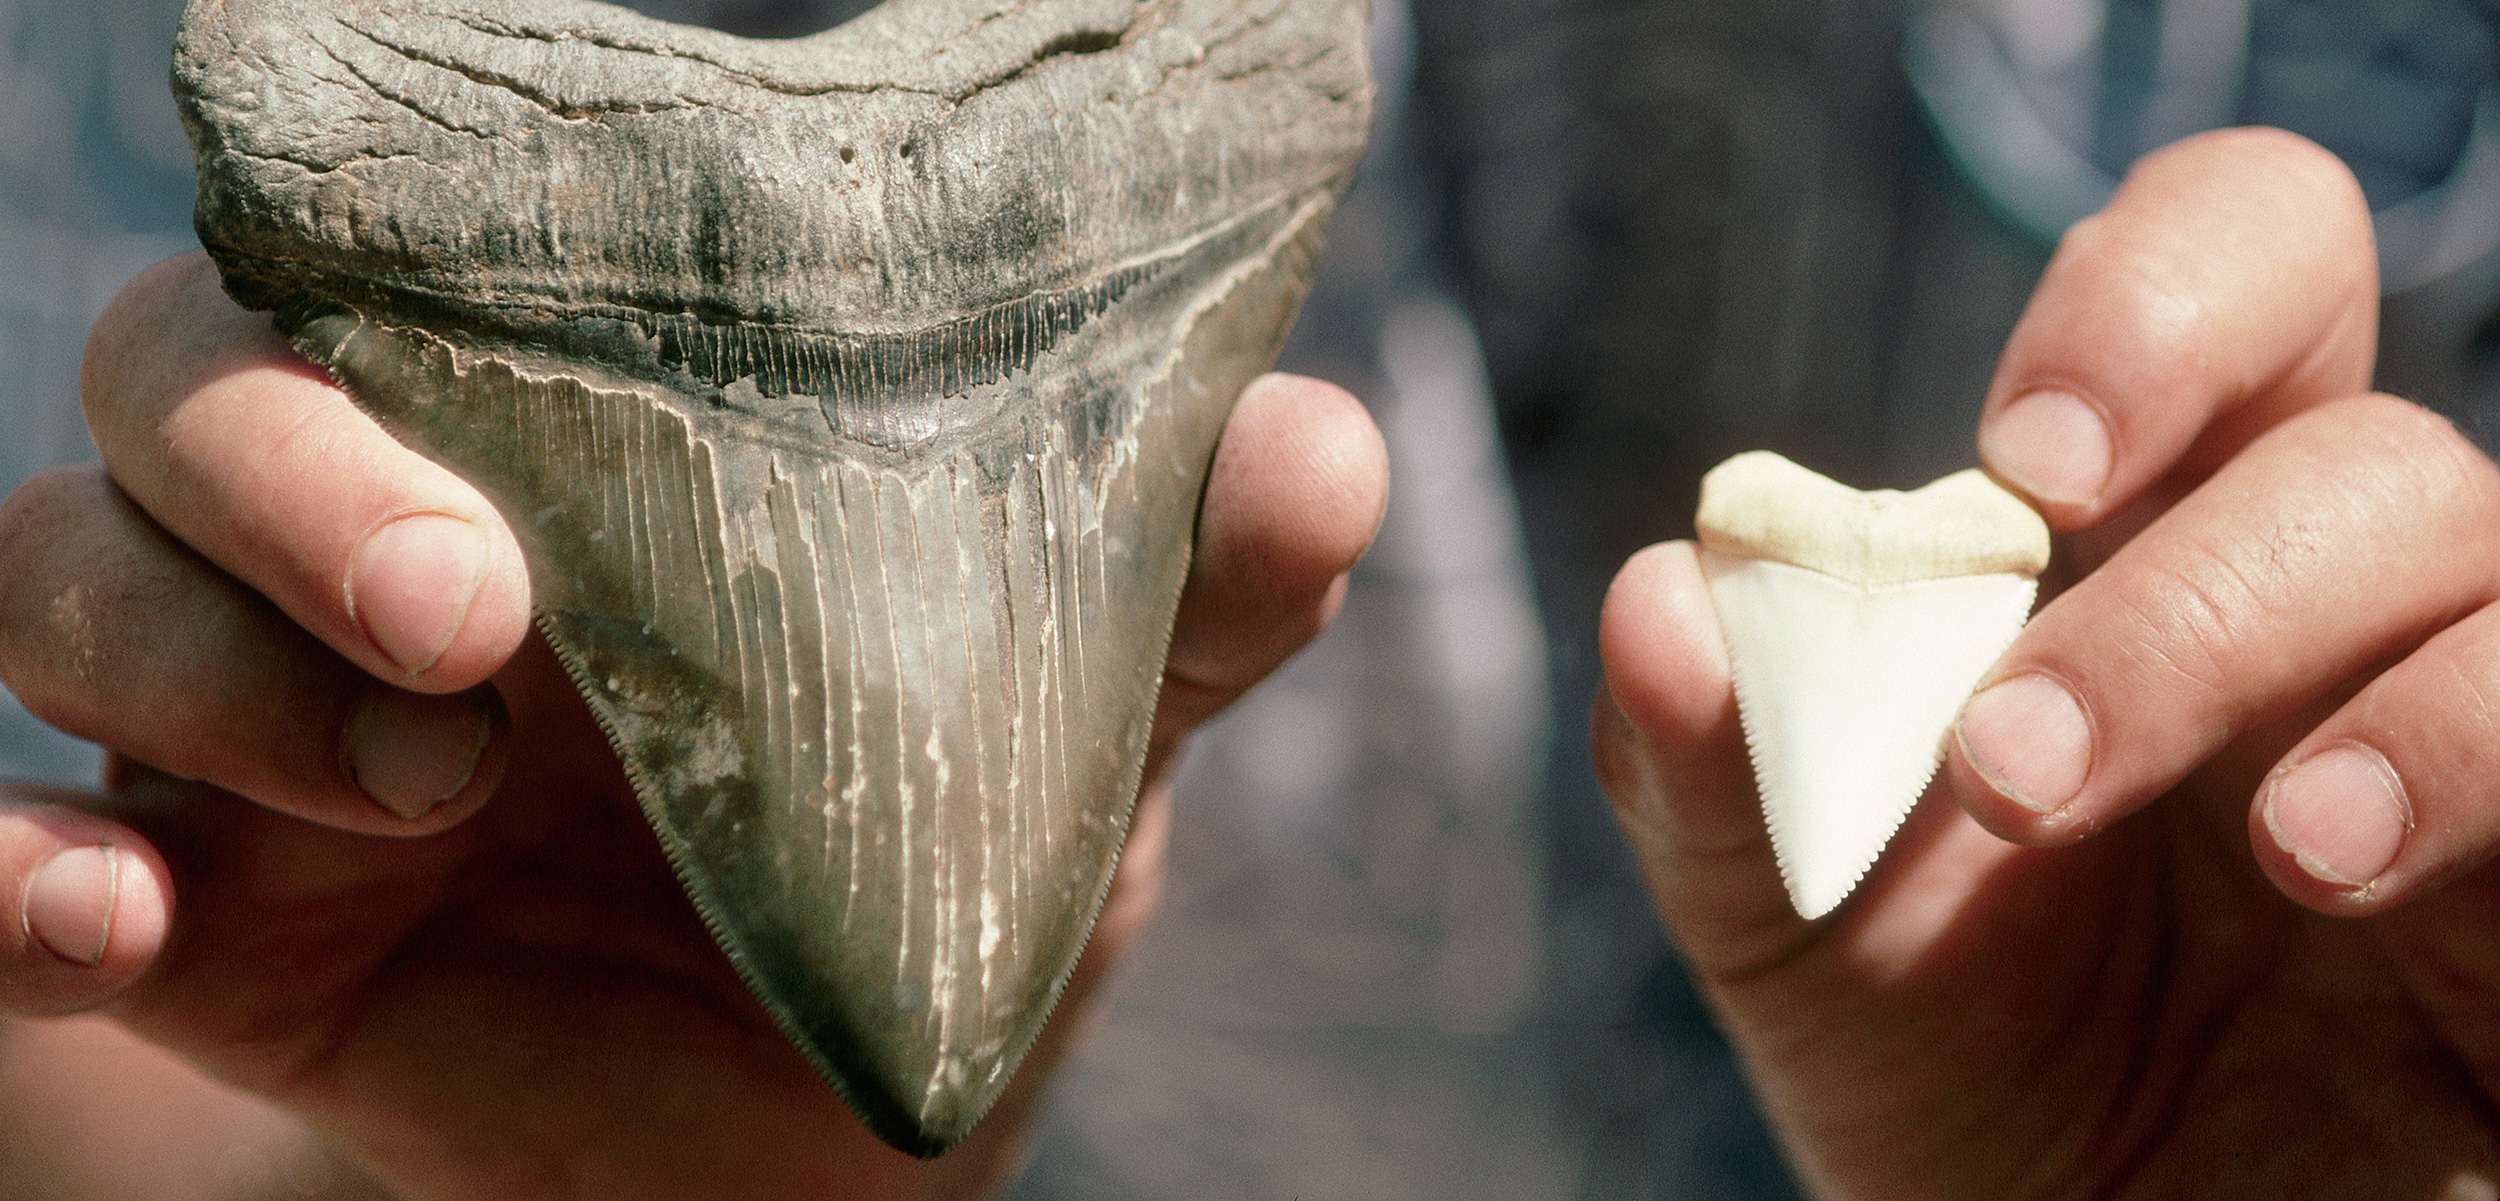 Megalodon teeth have been washing up on the shores of North Carolina. Here a megalodon tooth is held next to one from a great white shark. Photo by Jeffrey L. Rotman/Corbis